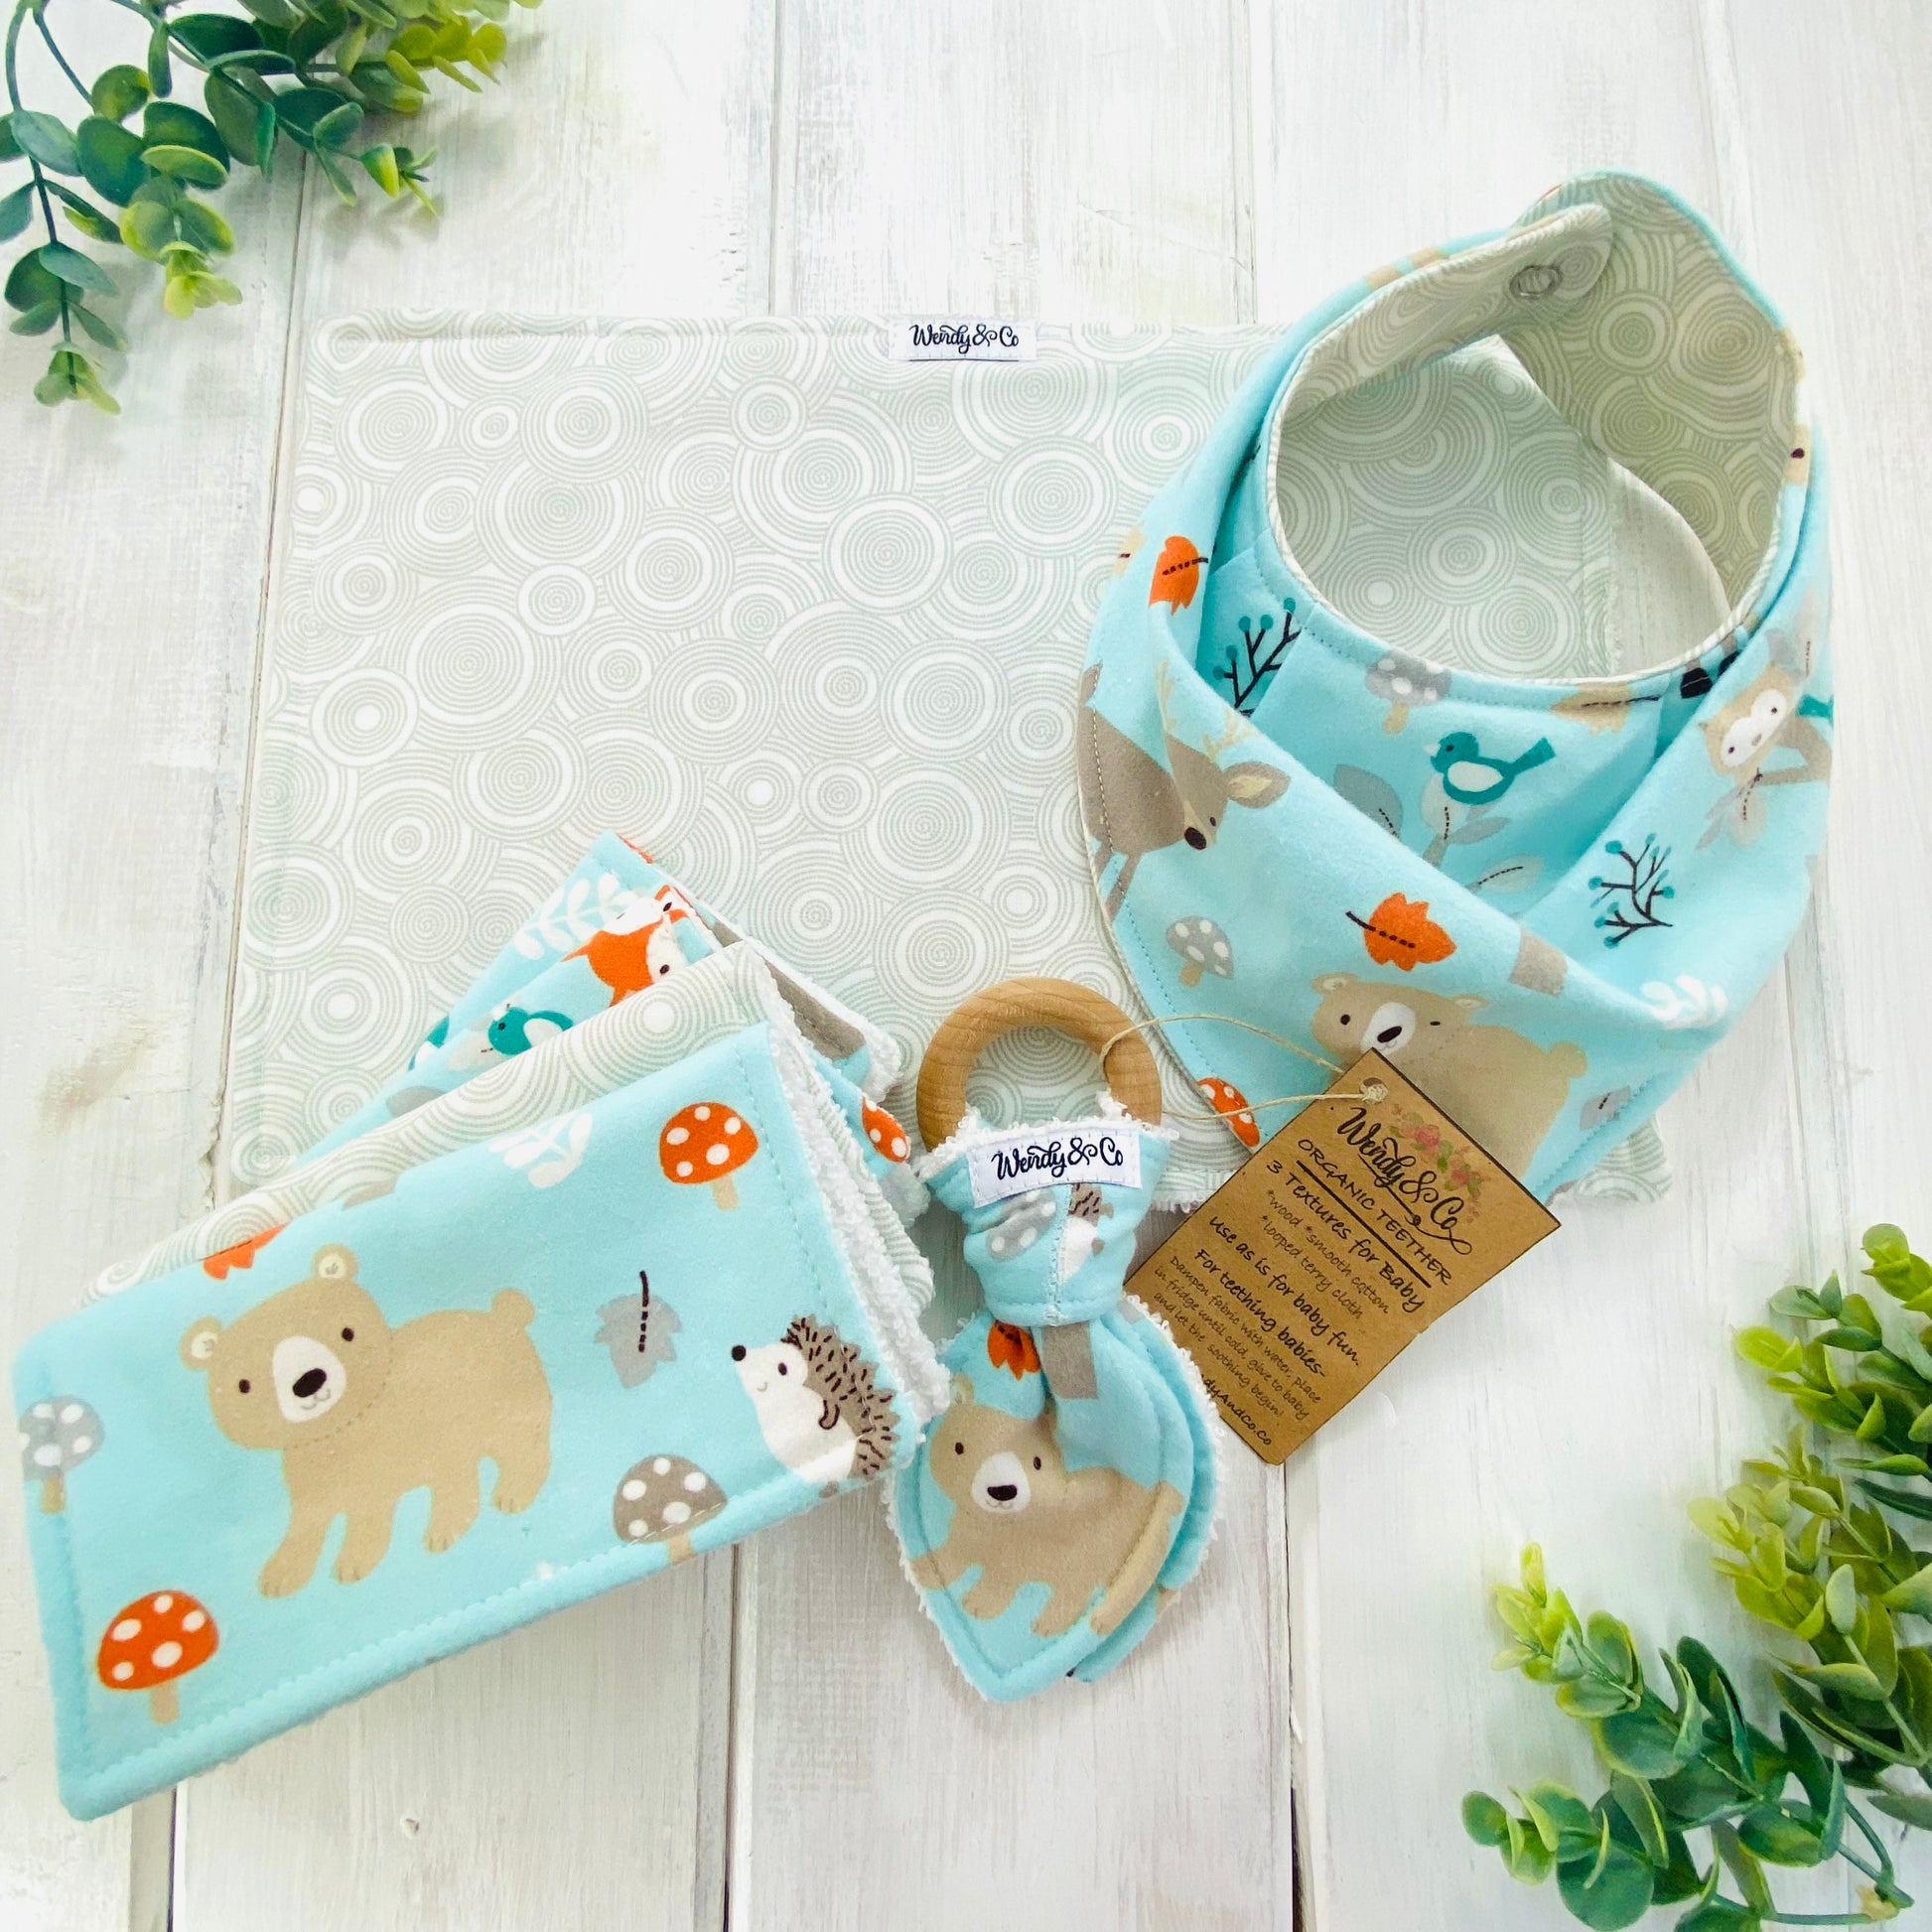 Soft baby blue woodland gift set for baby including bib, burp cloth, washing cloths, and teether.